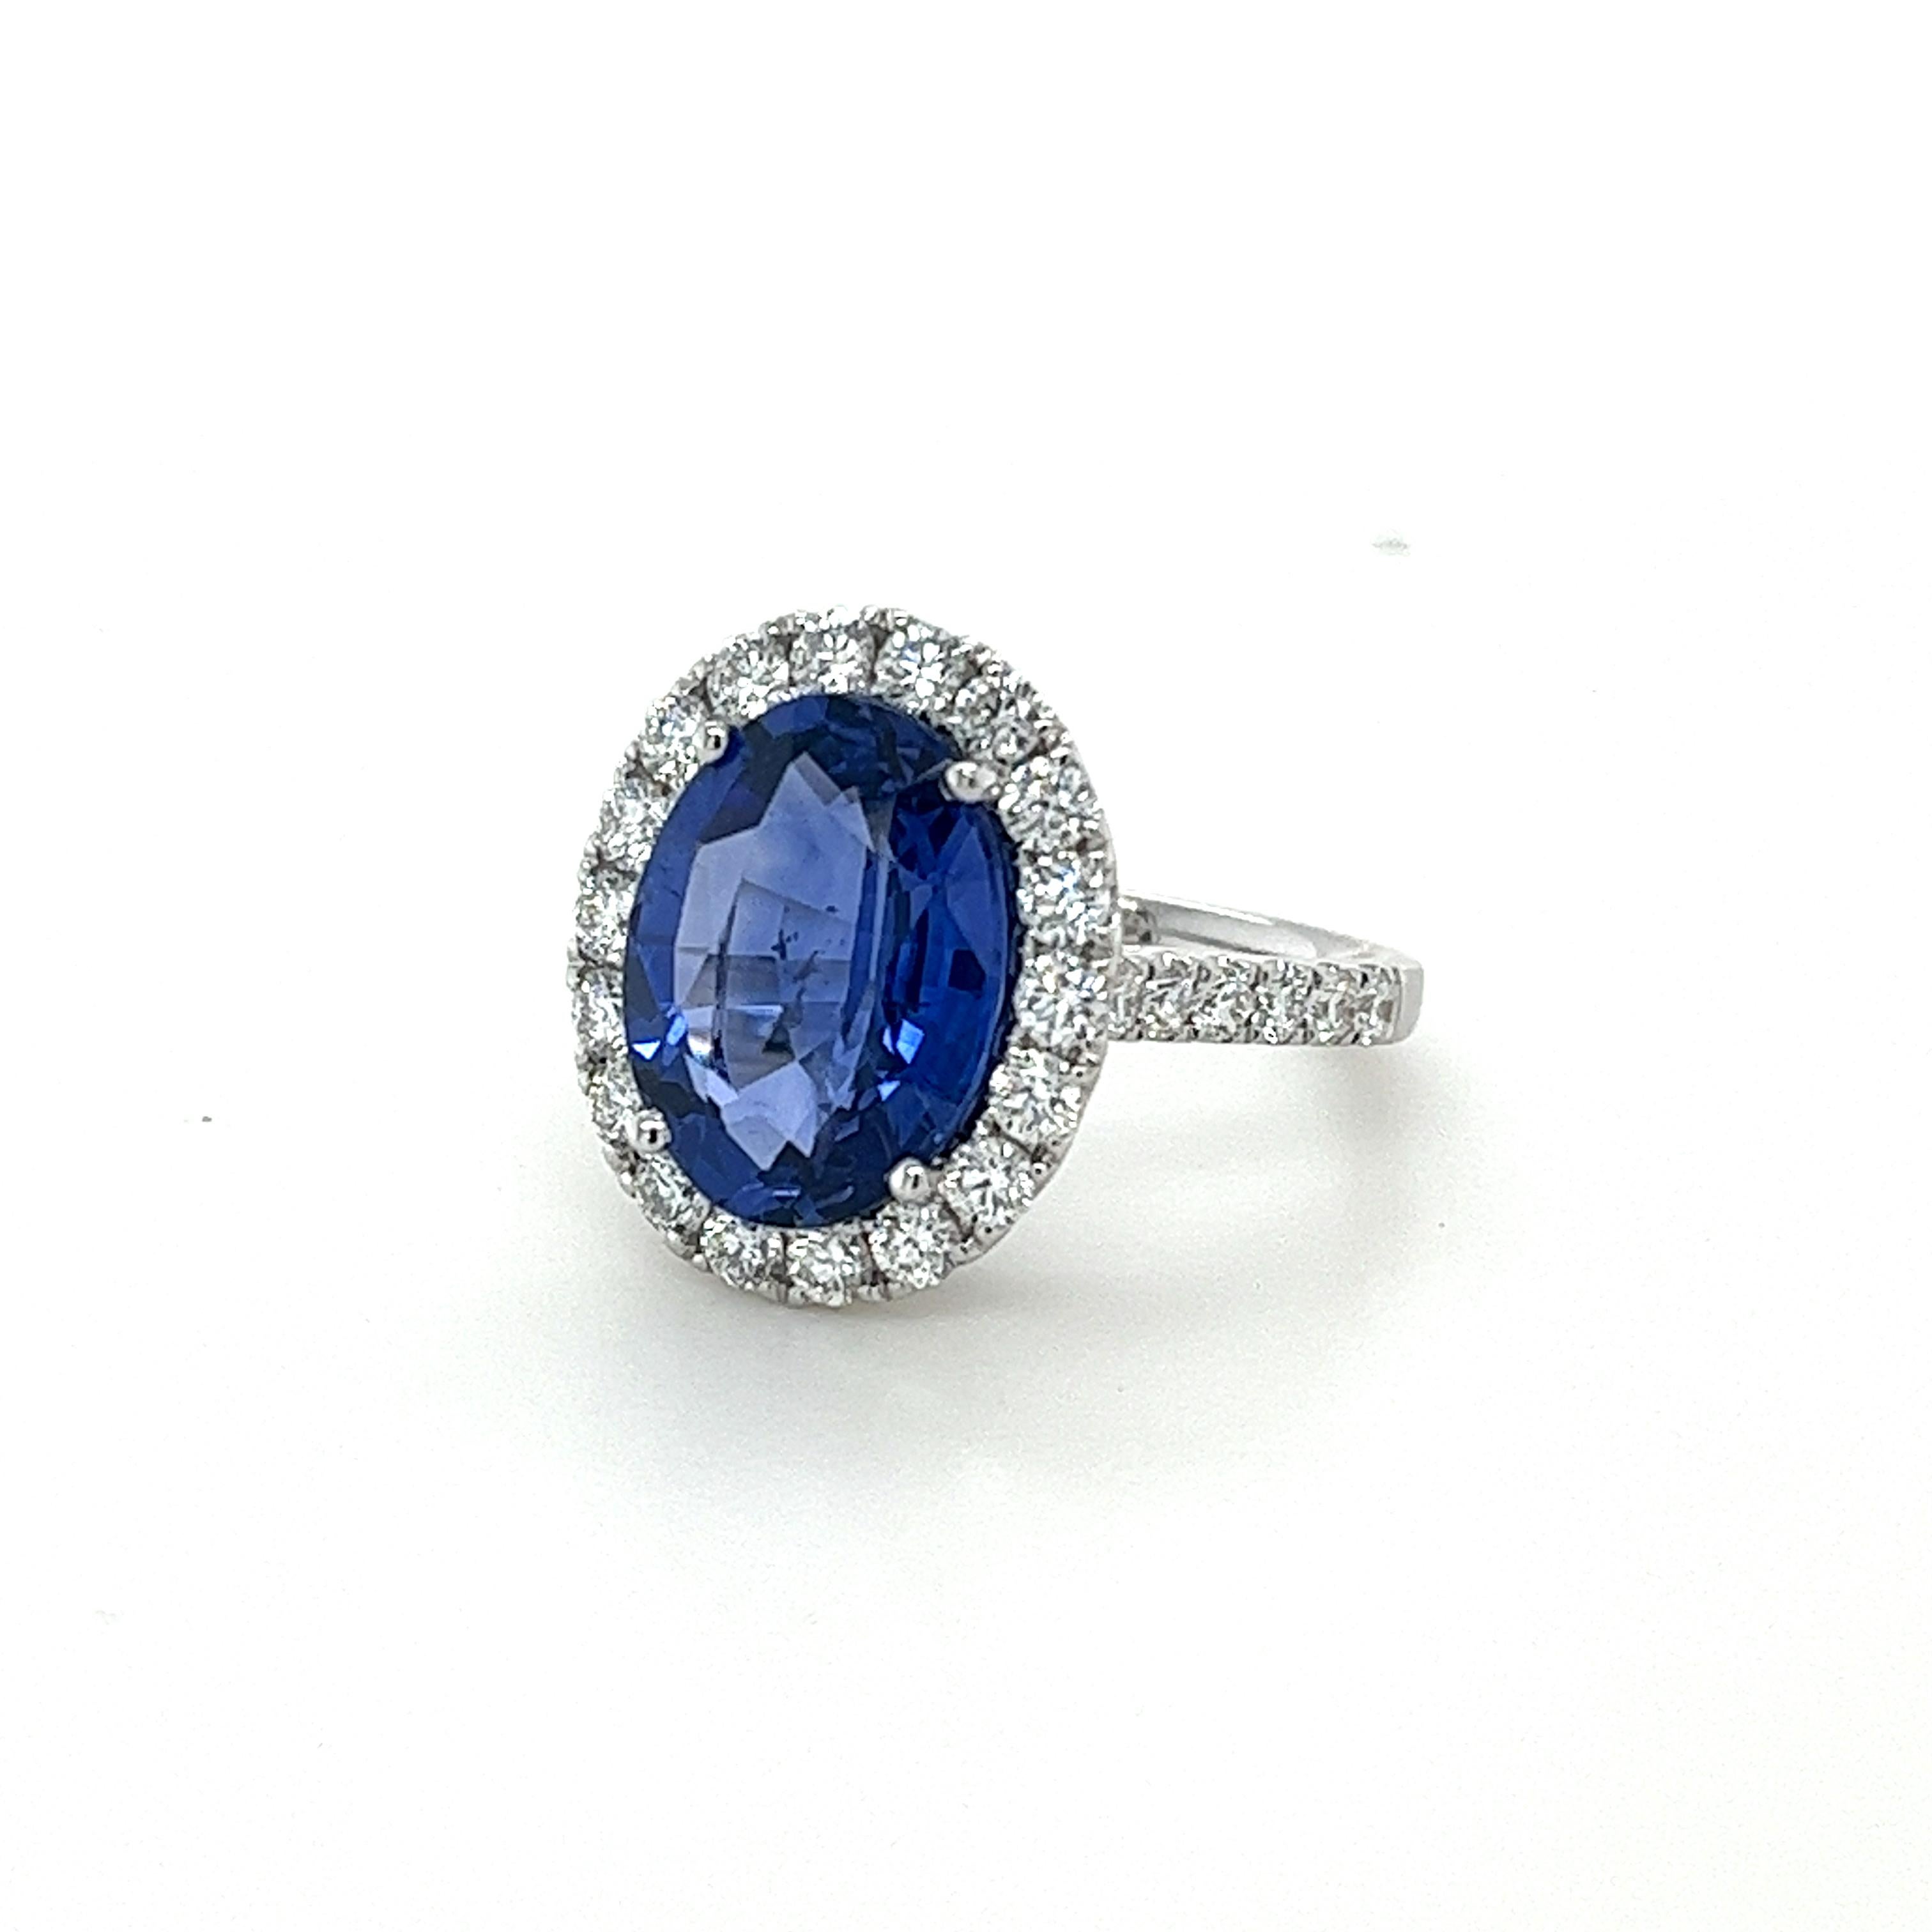 GIA certified oval Ceylon Sapphire weighing 5.94 carats
Measuring (13.22x9.96x5.25) mm
Diamonds weighing1.16 carats
Diamonds are GH-SI1
Set in 18 karat white gold ring
5.56 grams